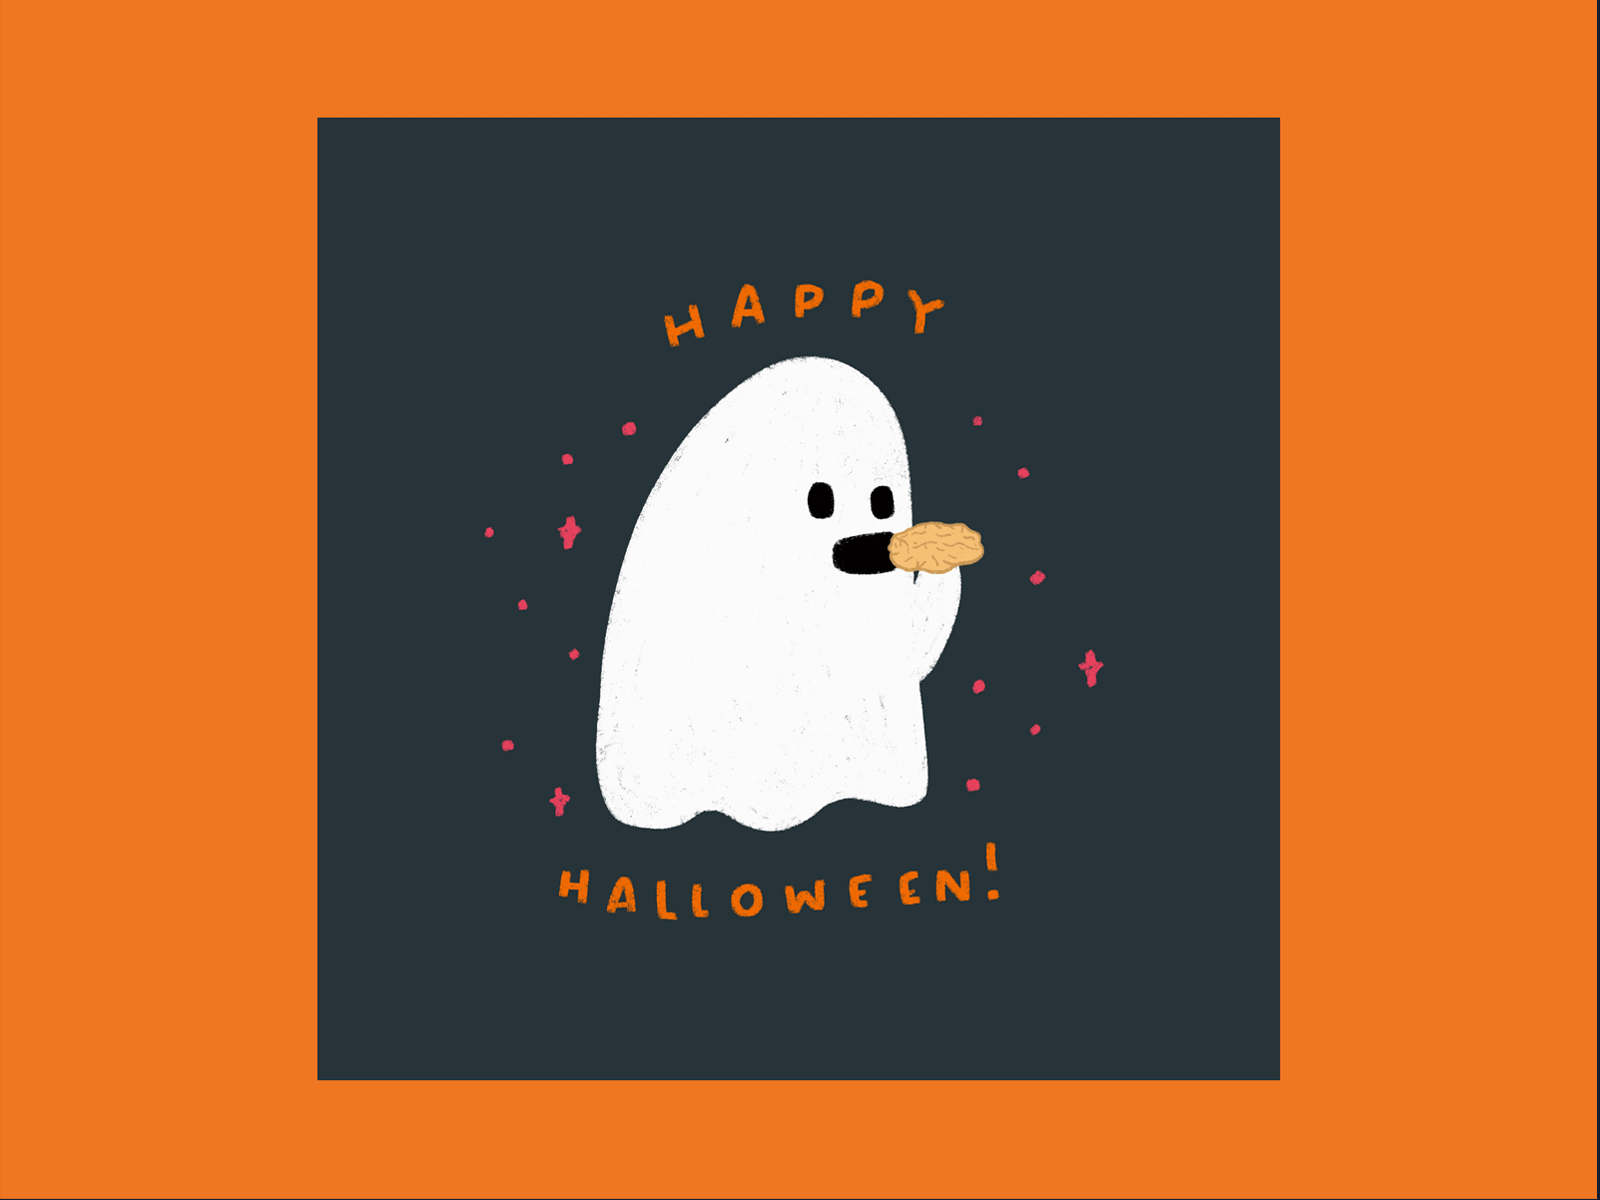 Happy Halloween Ghostie Gif for Preservation Biscuit Company advertisment animated gif design graphic design halloween art hand drawn animation hand drawn gif illustrated ad illustration instagram gif